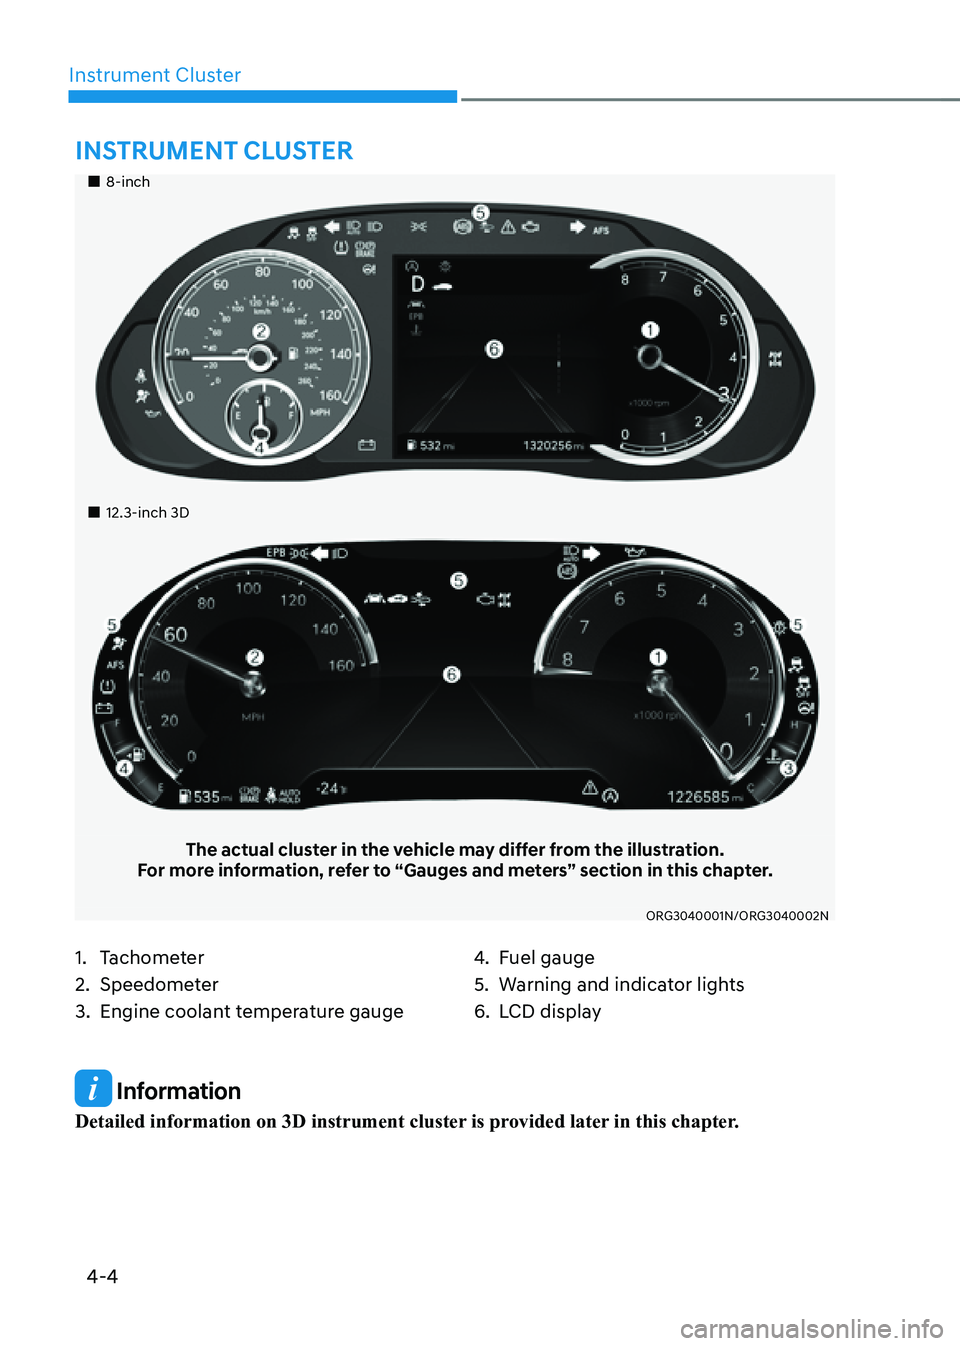 GENESIS G80 2021  Owners Manual 4-4
Instrument Cluster
 Information
Detailed information on 3D instrument cluster is provided later in this chapter.
„„8-inch
„„12.3-inch 3D
The actual cluster in the vehicle may d